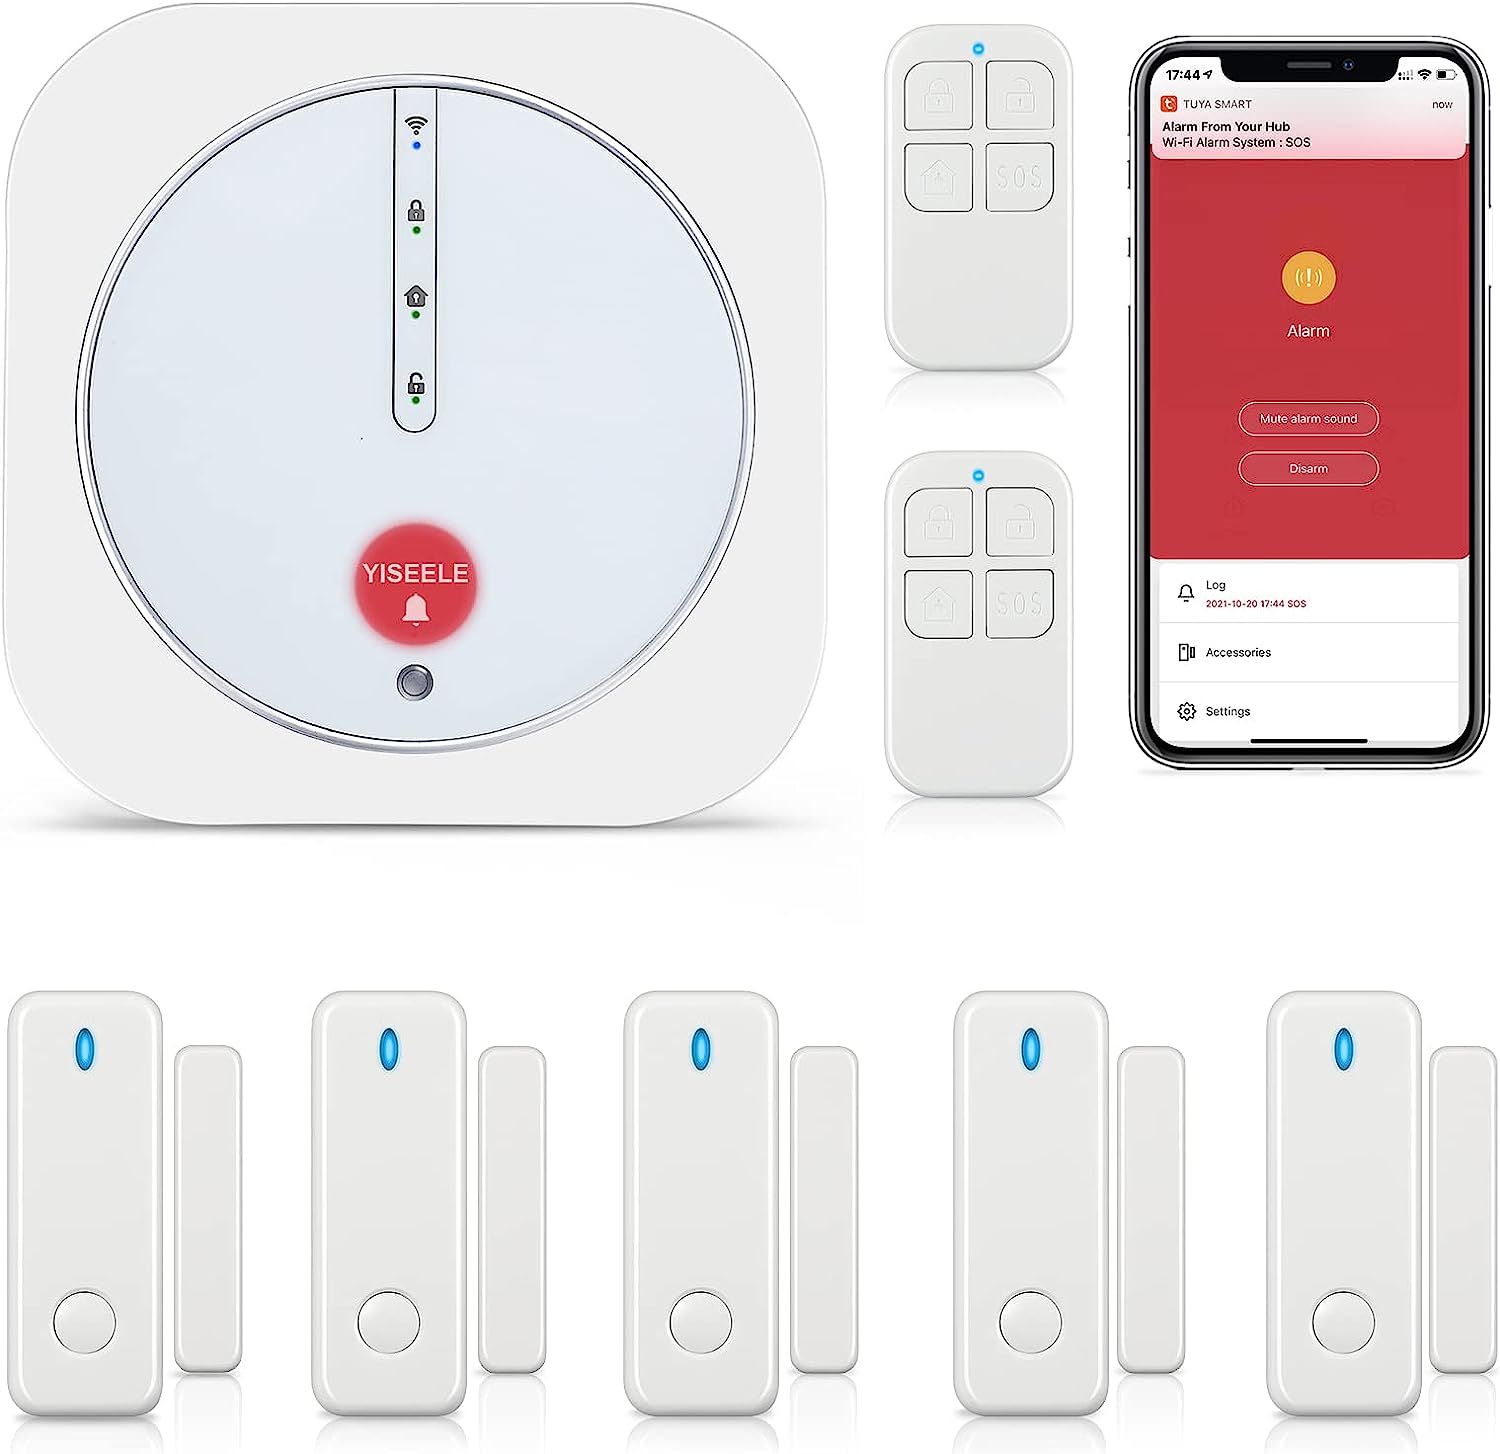 YISEELE Home Security System, Door Alarm System with [...]